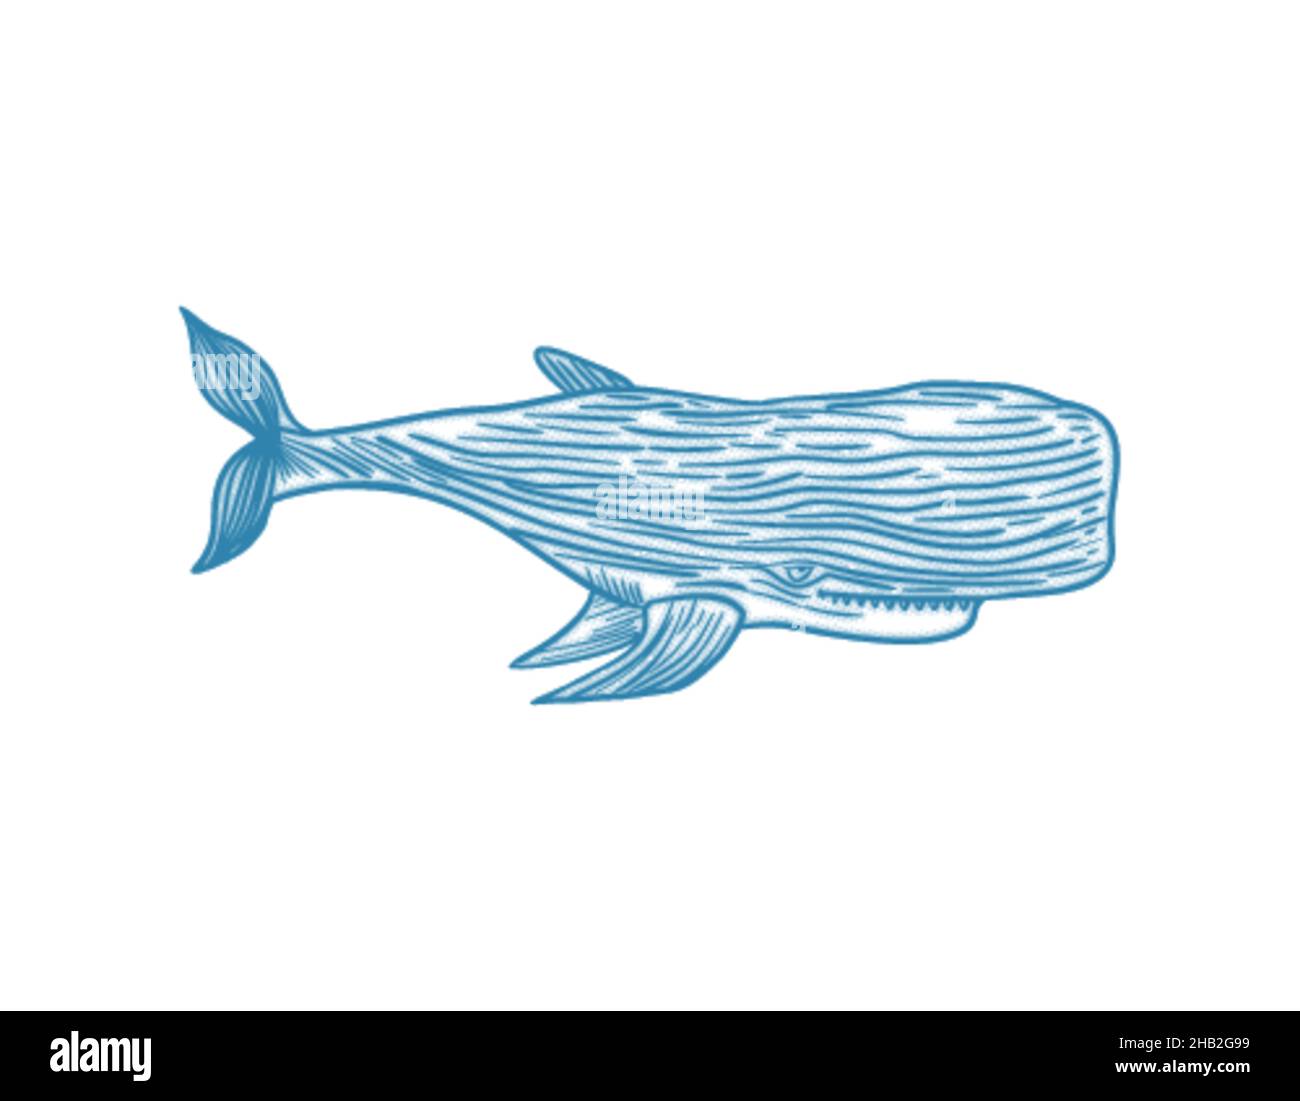 Sperm whale hand drawing isolated. cachalot vector illustration Stock Vector